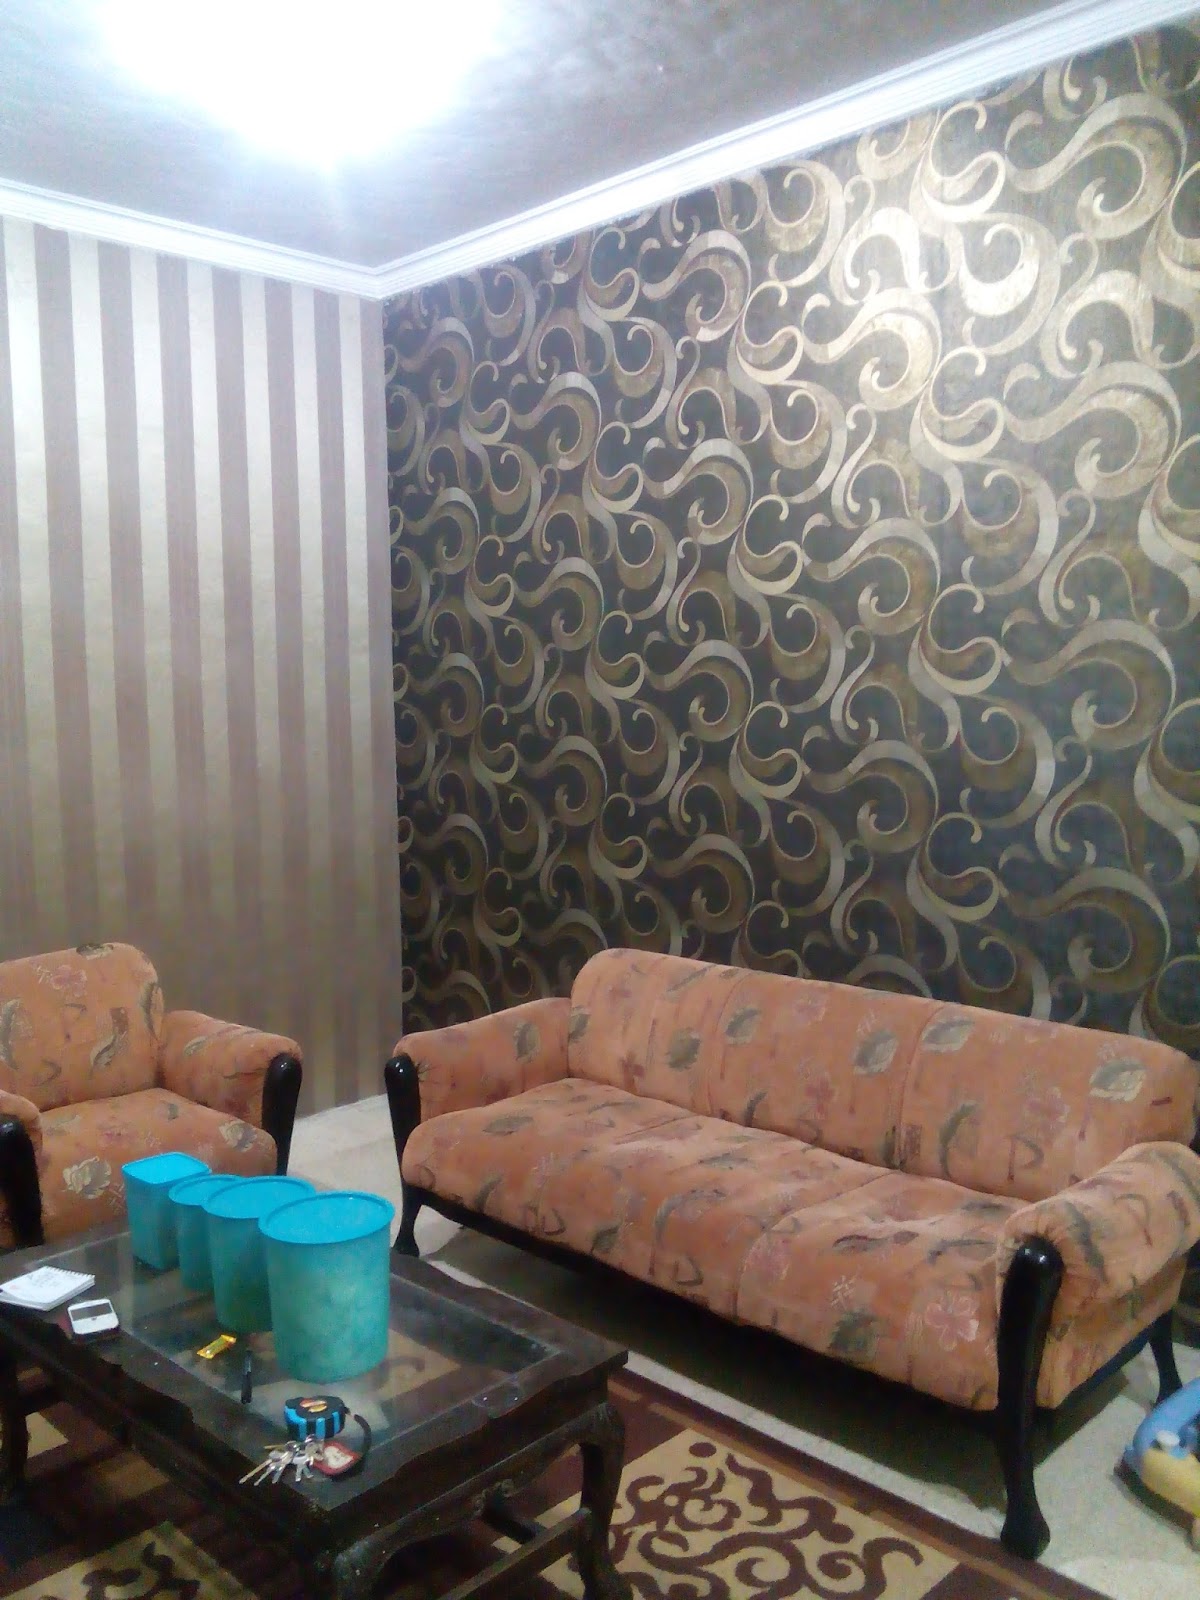 wallpaper dinding murah,wall,room,furniture,property,couch